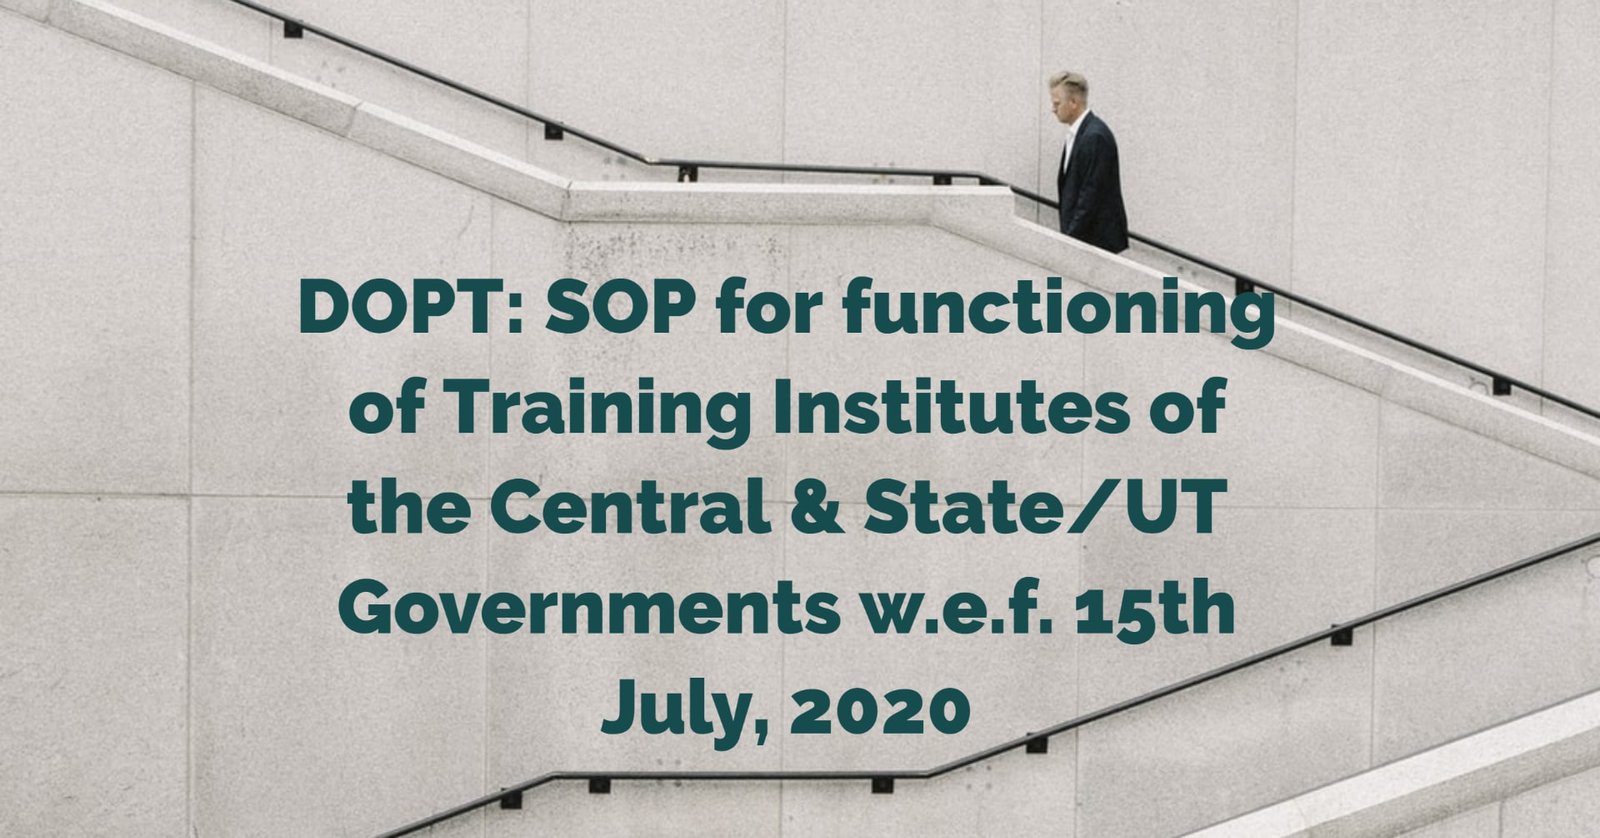 DOPT_ SOP for functioning of Training Institutes of the Central & State_UT Governments w.e.f. 15th July, 2020